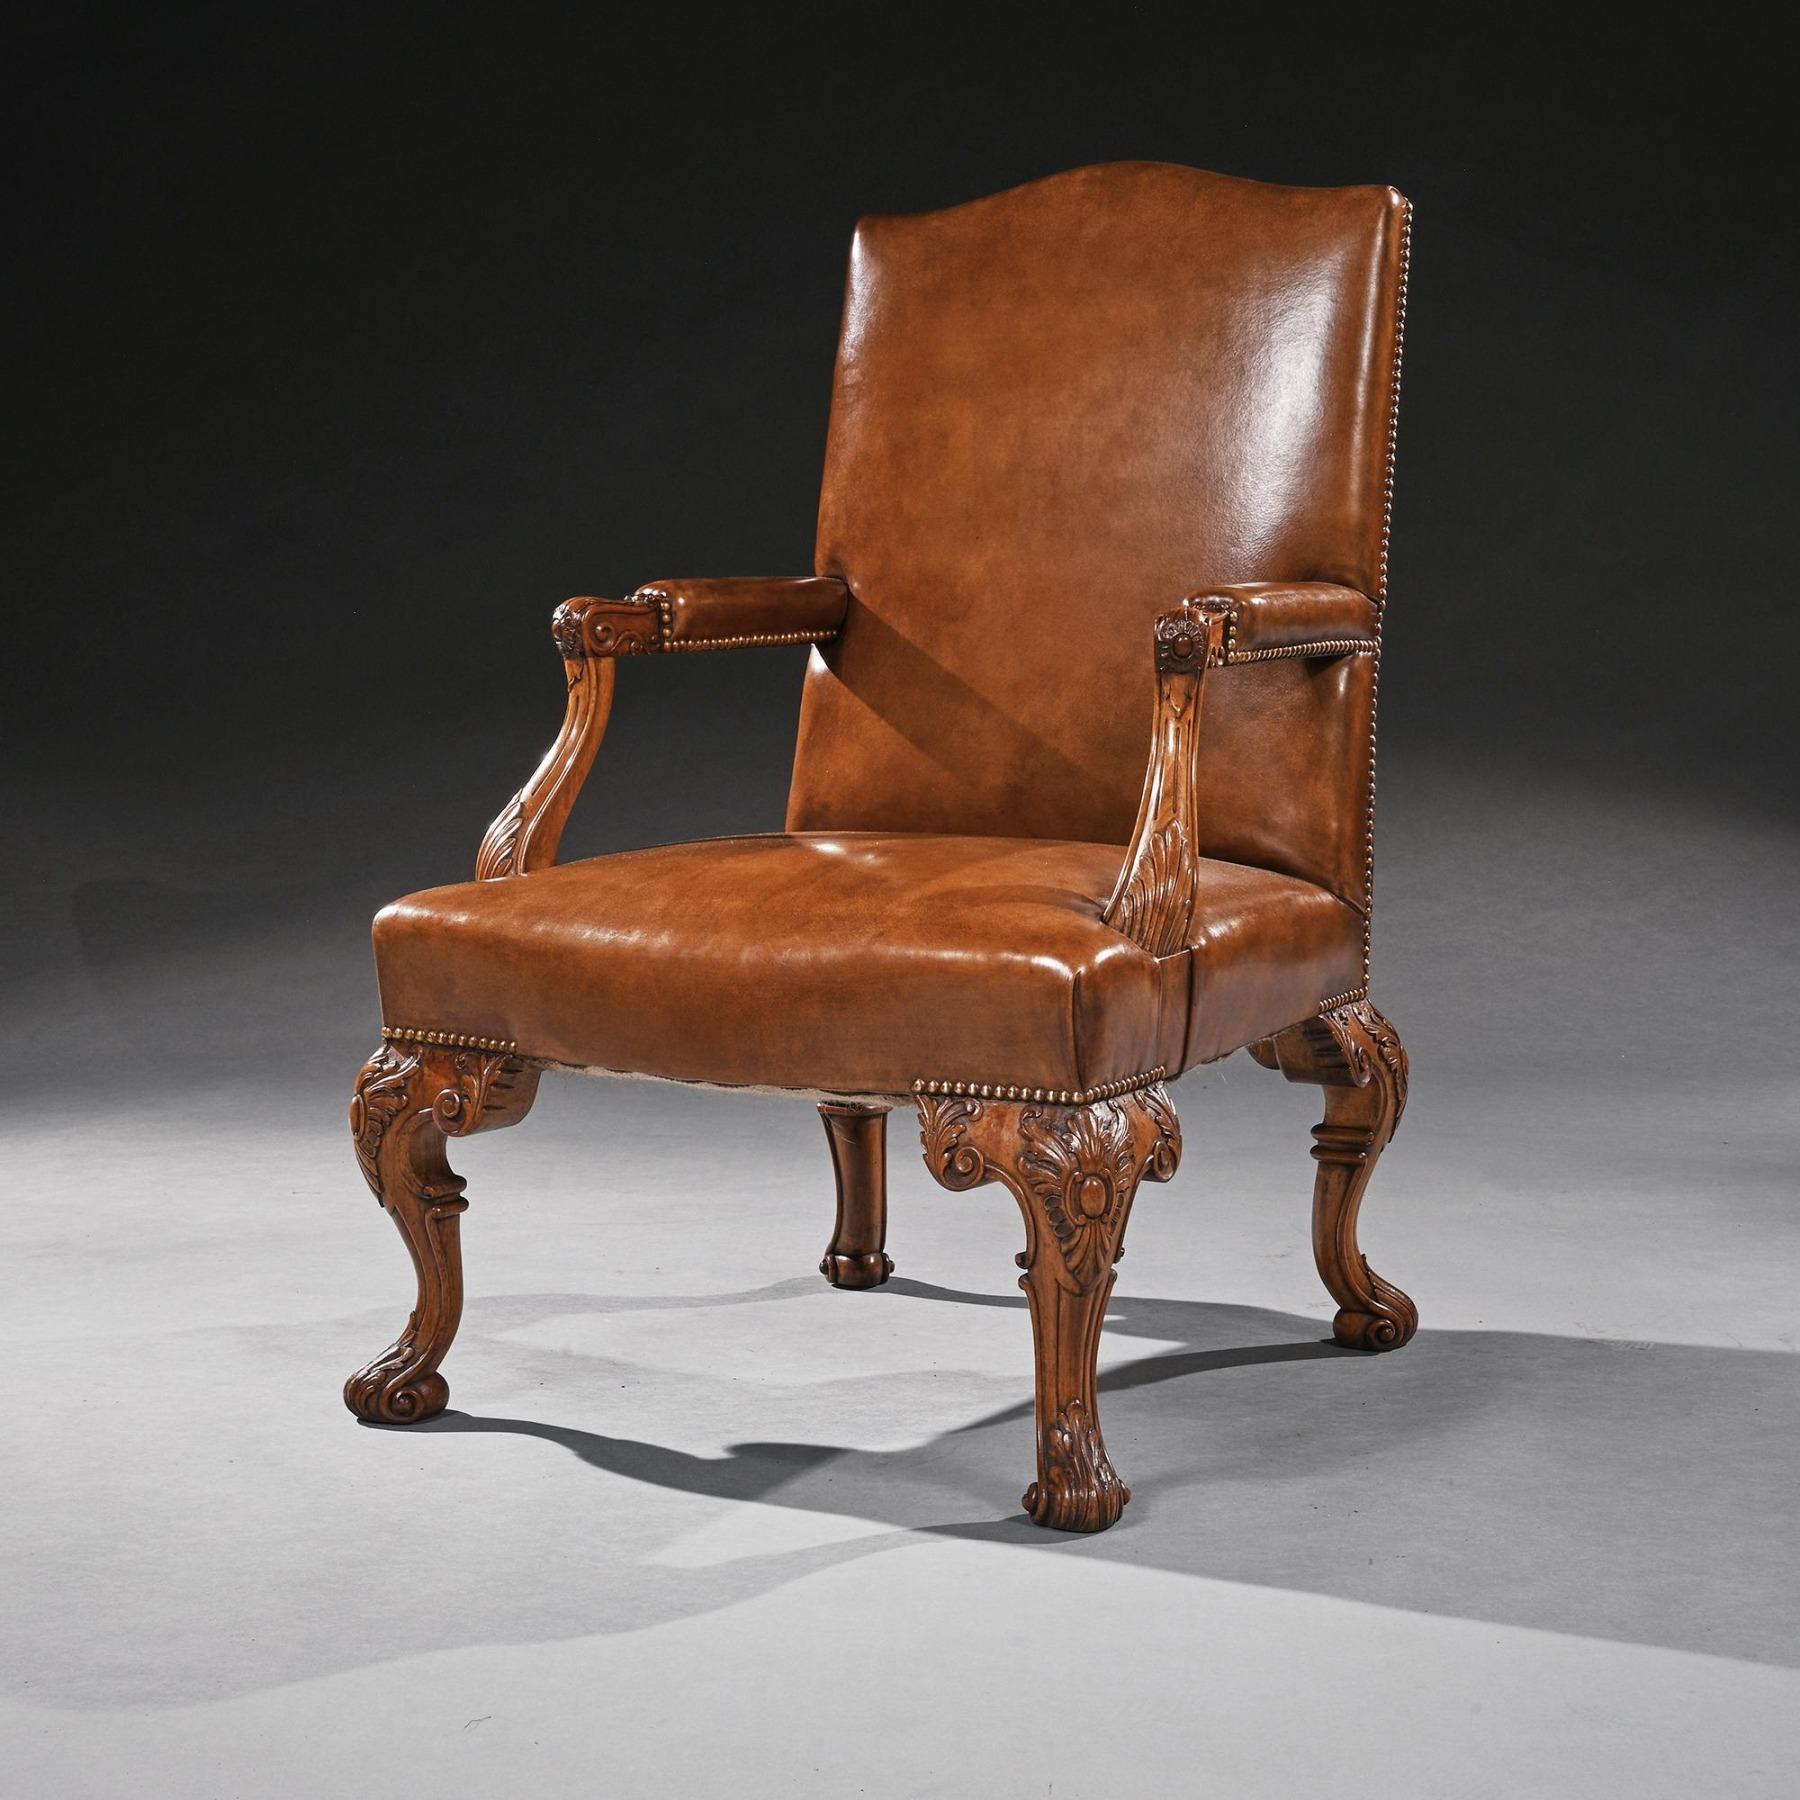 English Early 20th Century Walnut Carved Leather Upholstery Armchair For Sale